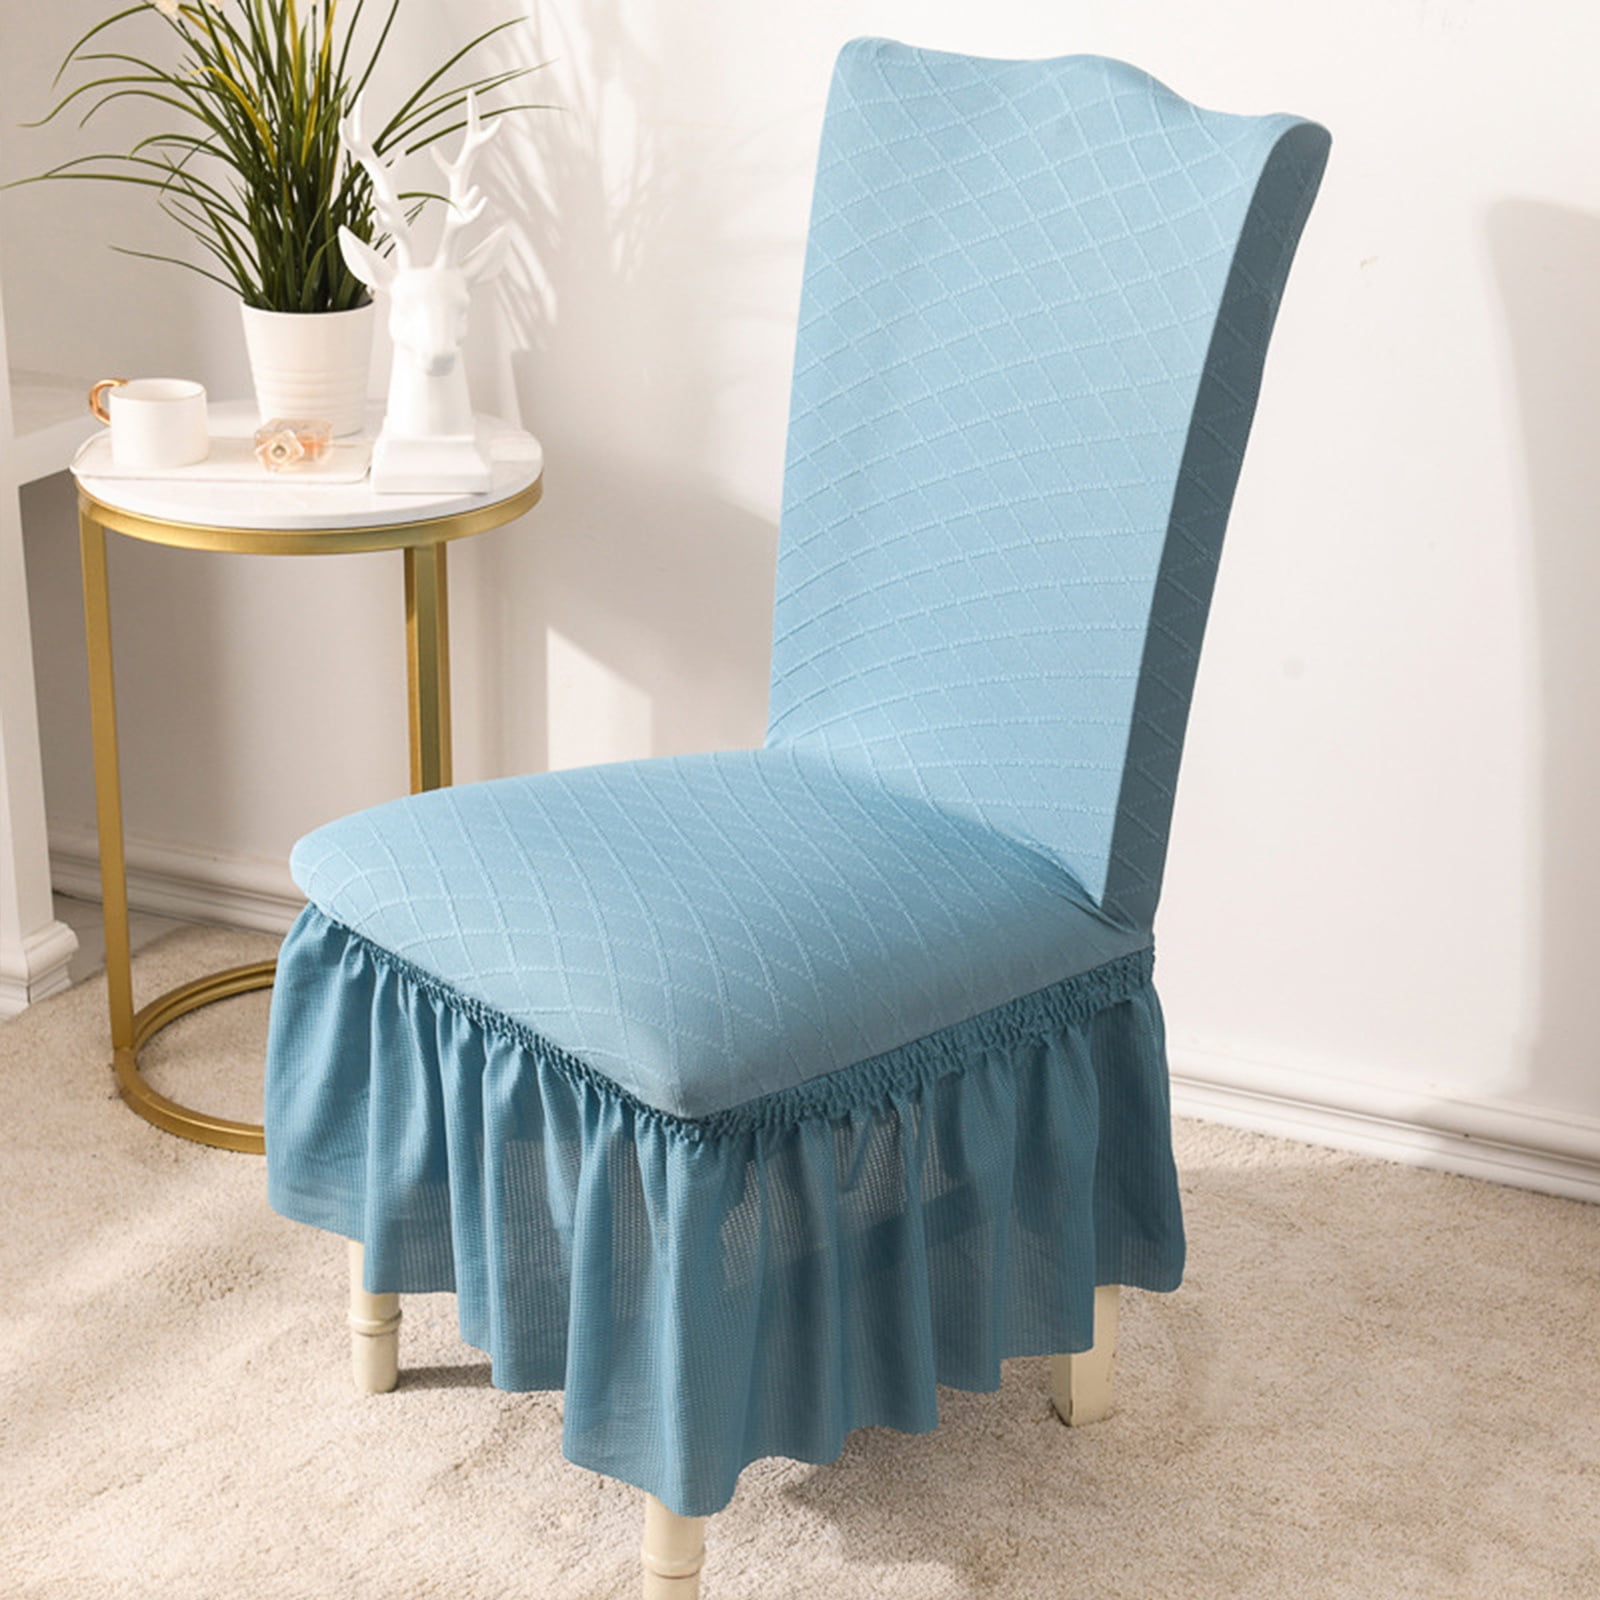 Poly Visa Chair Cover With Pleats 3 Colors Slipcover Wedding Events Decor Home 